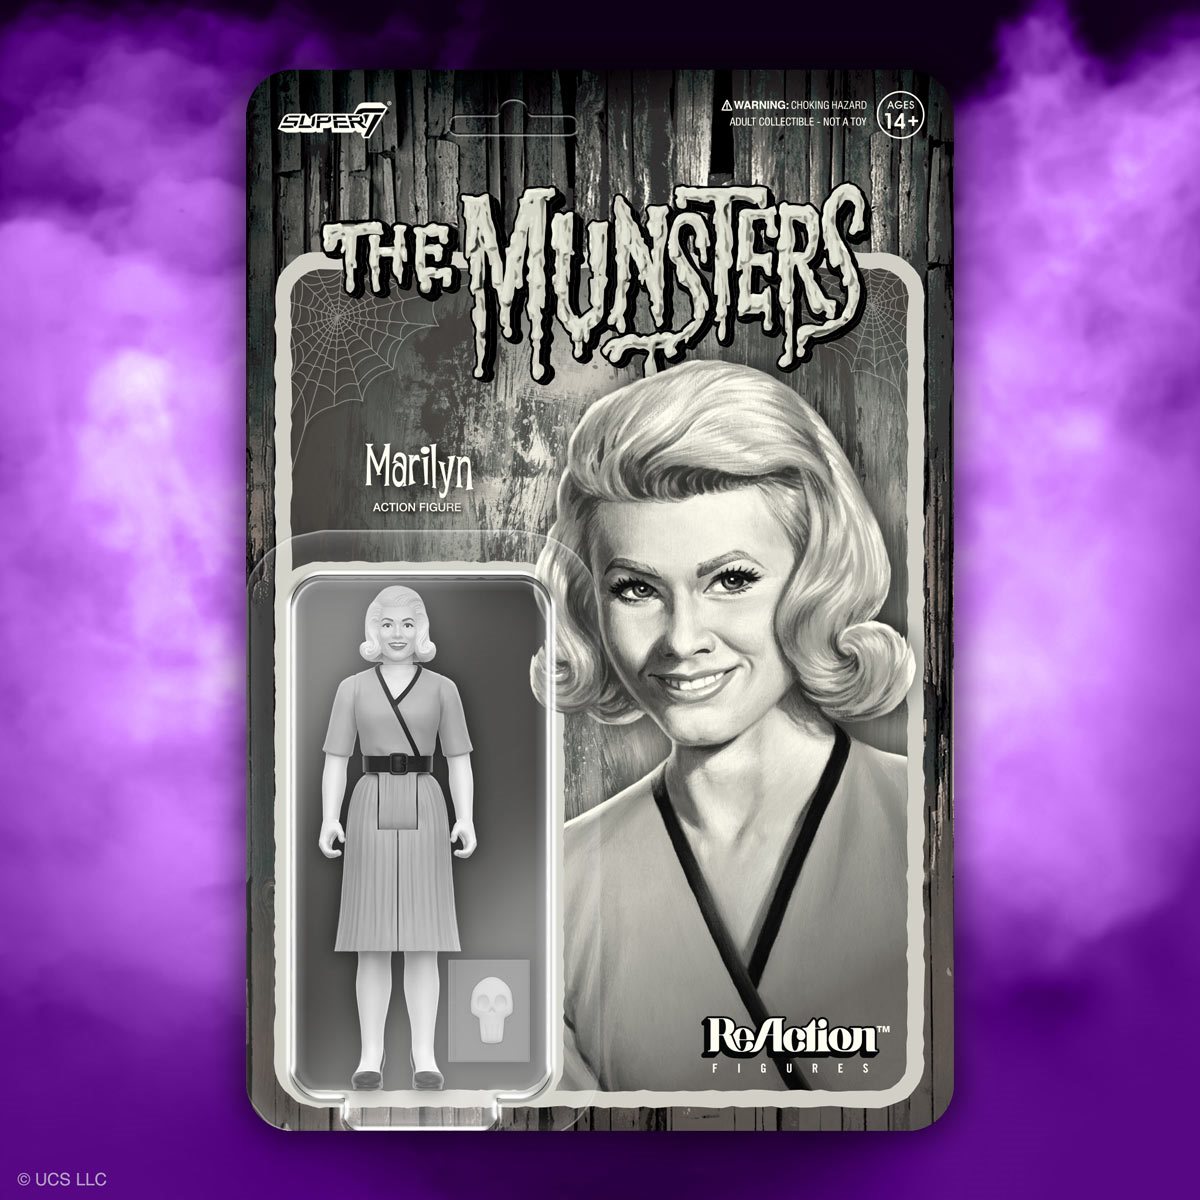 Super7 The Munsters Grayscale Marilyn Munster